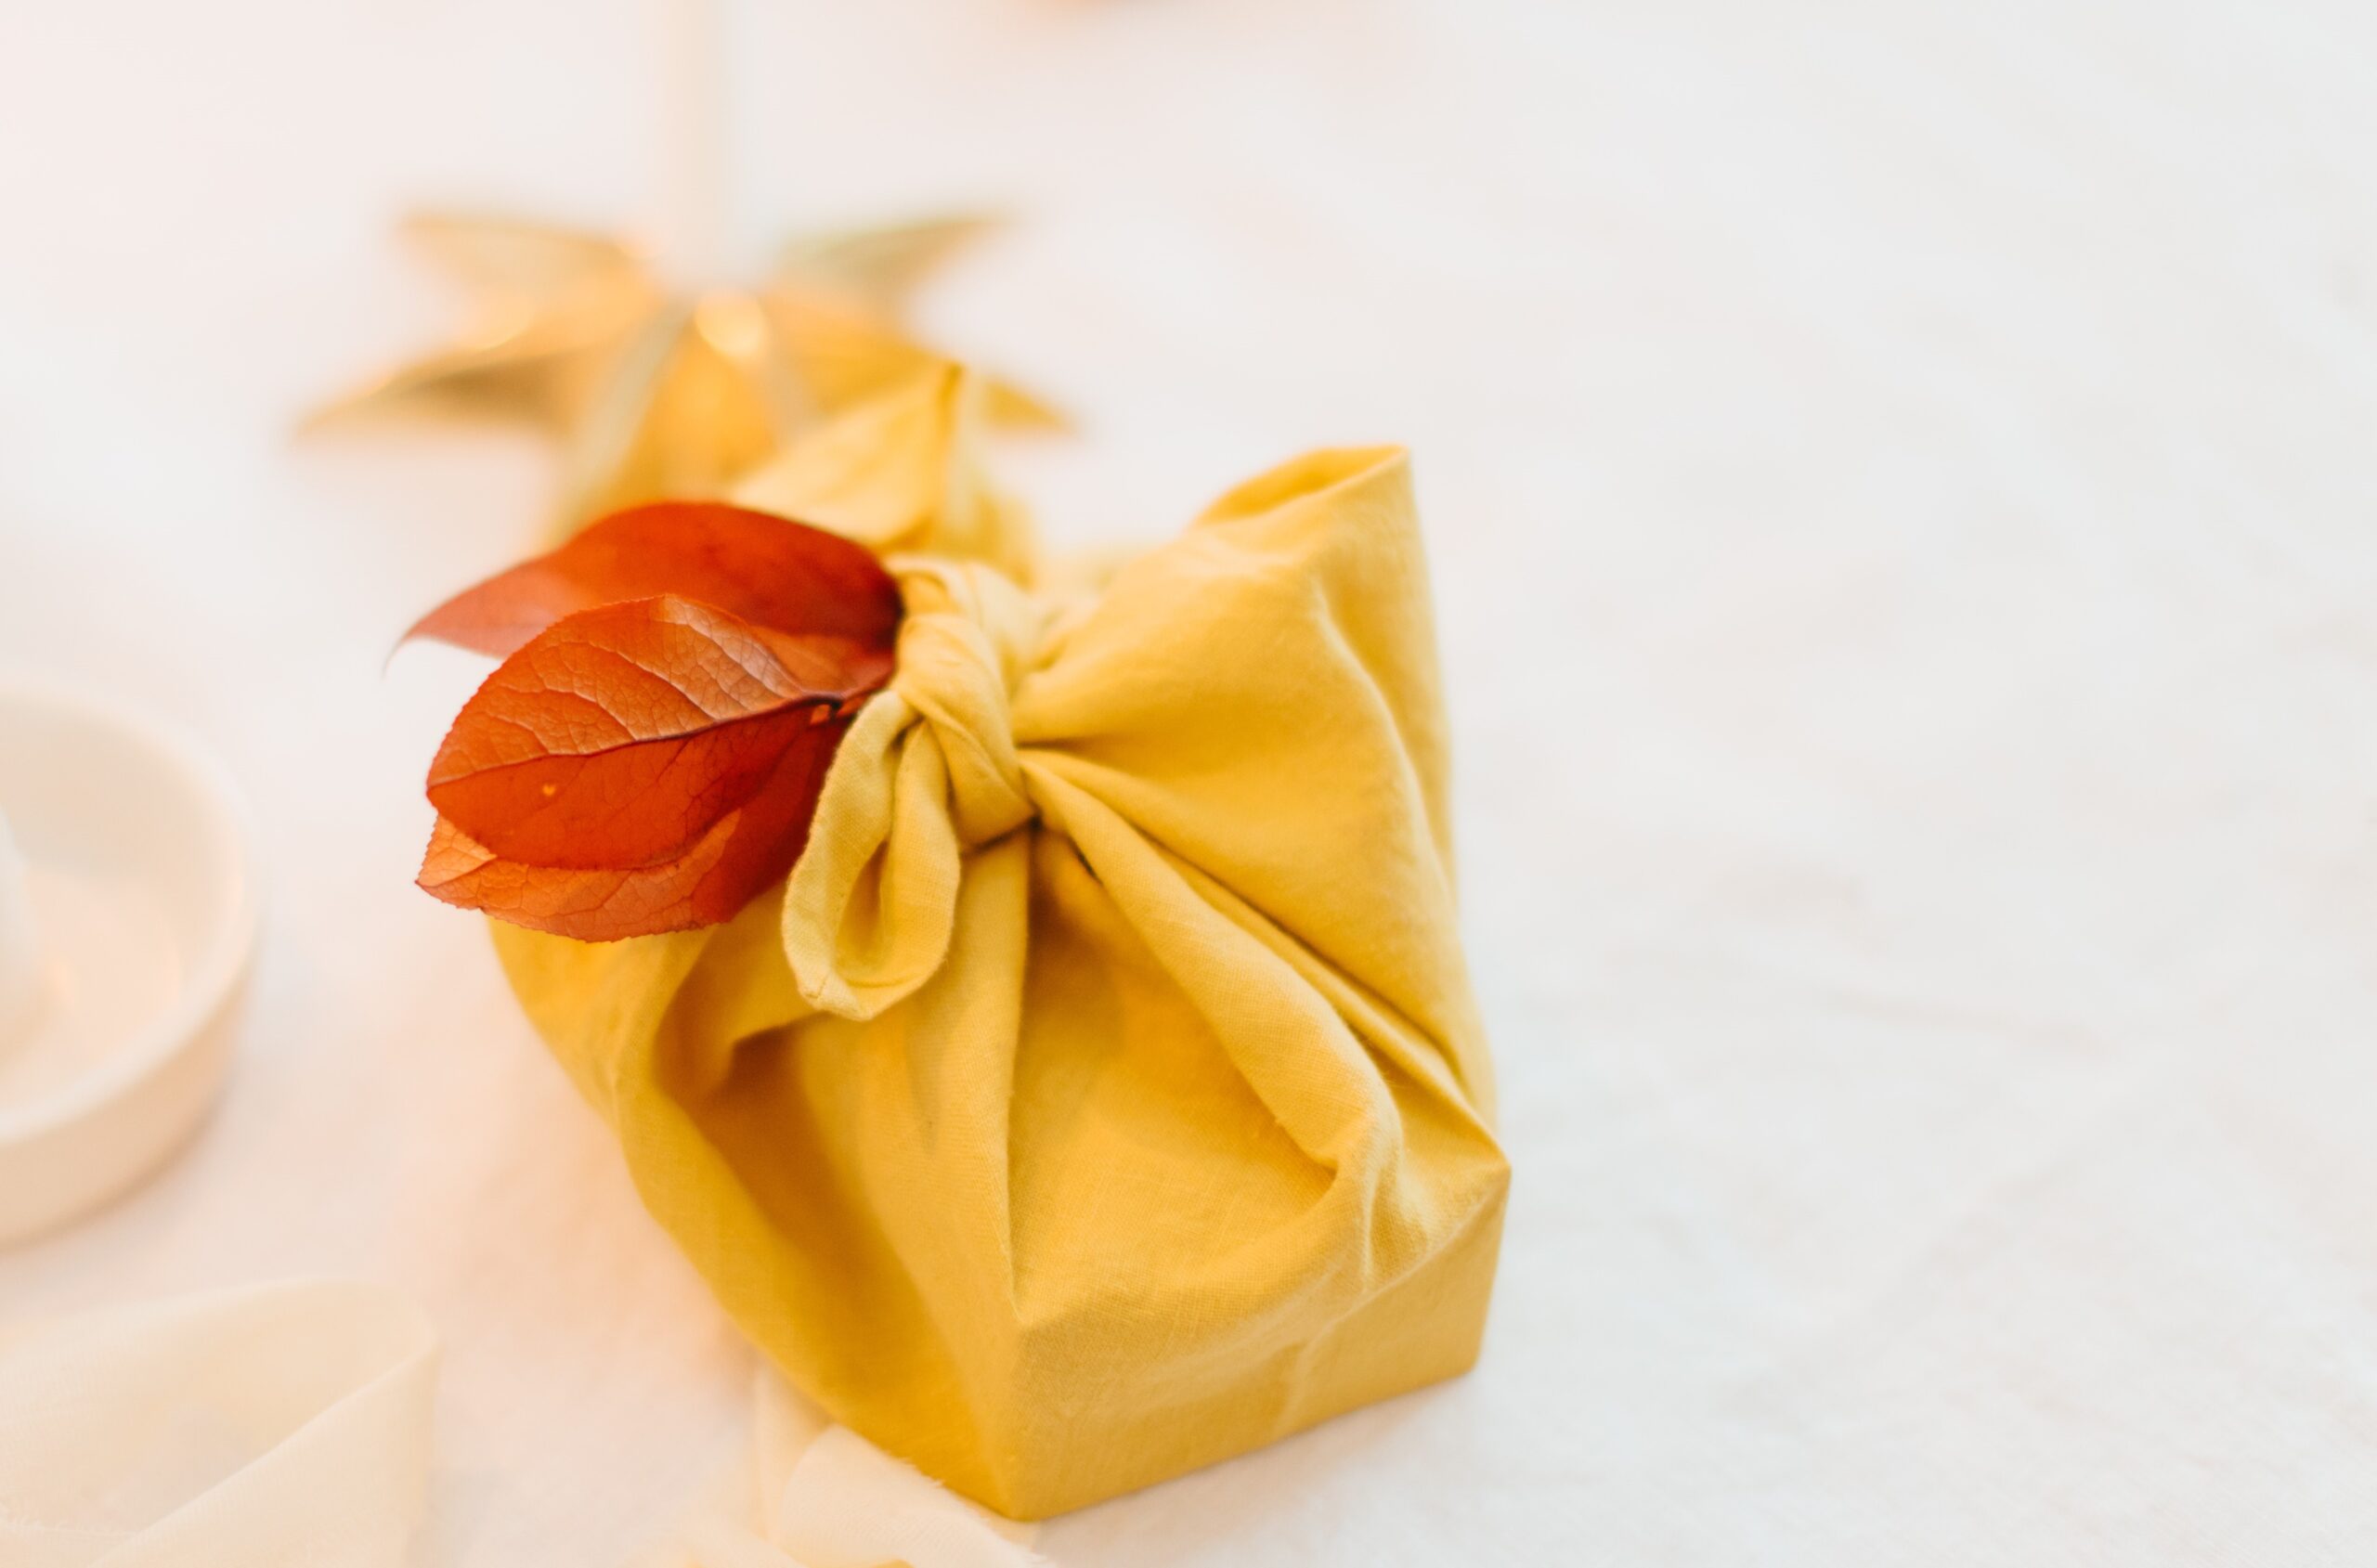 A present brightly wrapped in a yellow furoshiki is set on a table adorned with a white tablecloth.